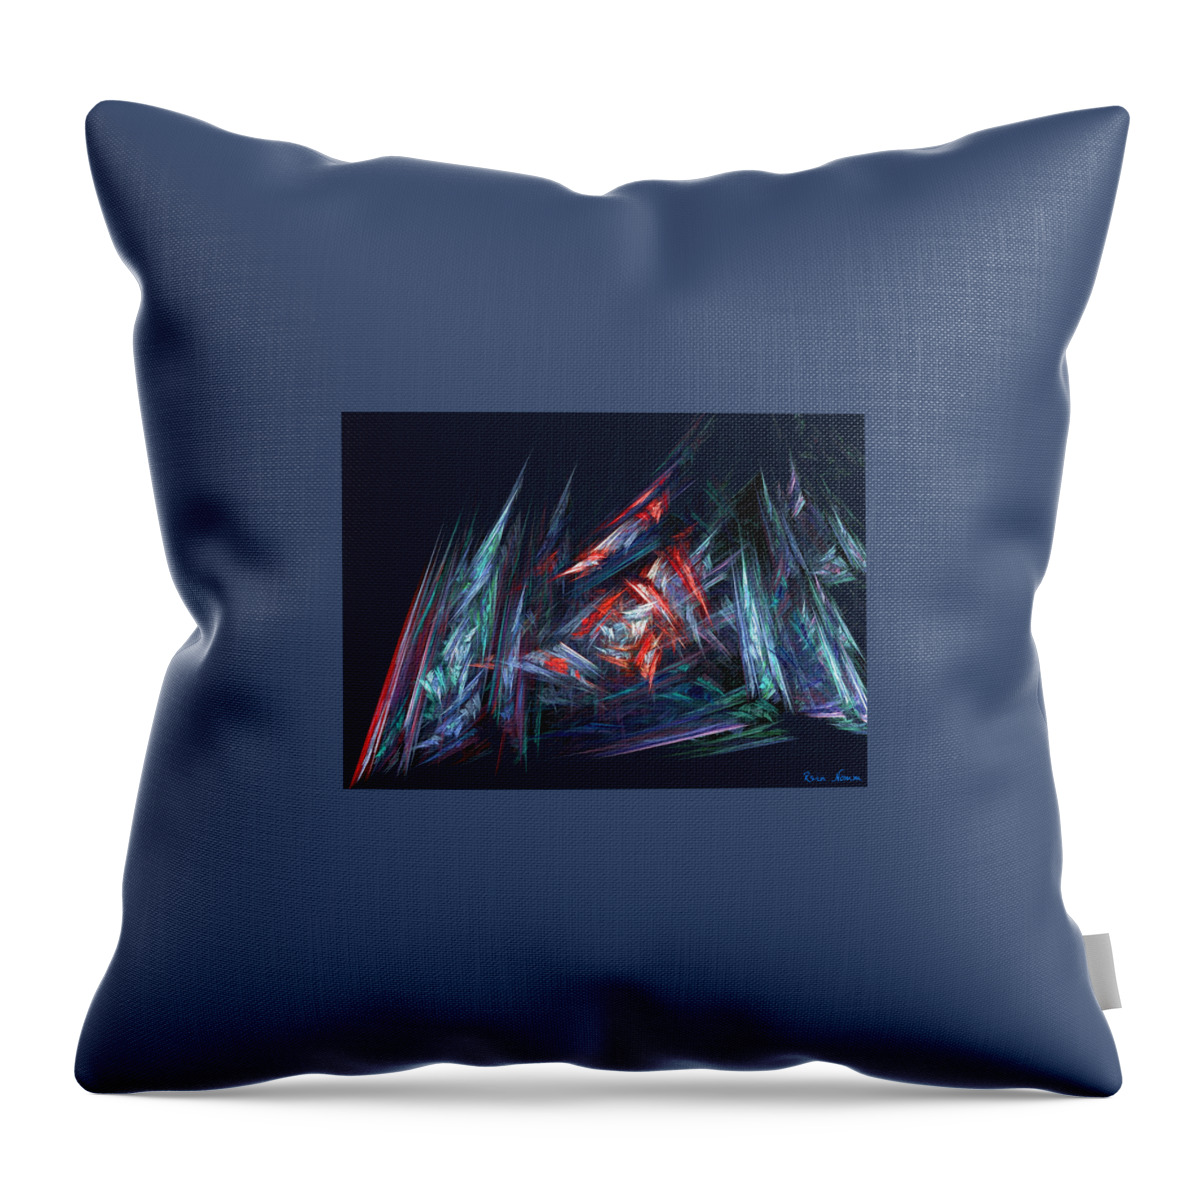  Throw Pillow featuring the digital art Dire Portent by Rein Nomm